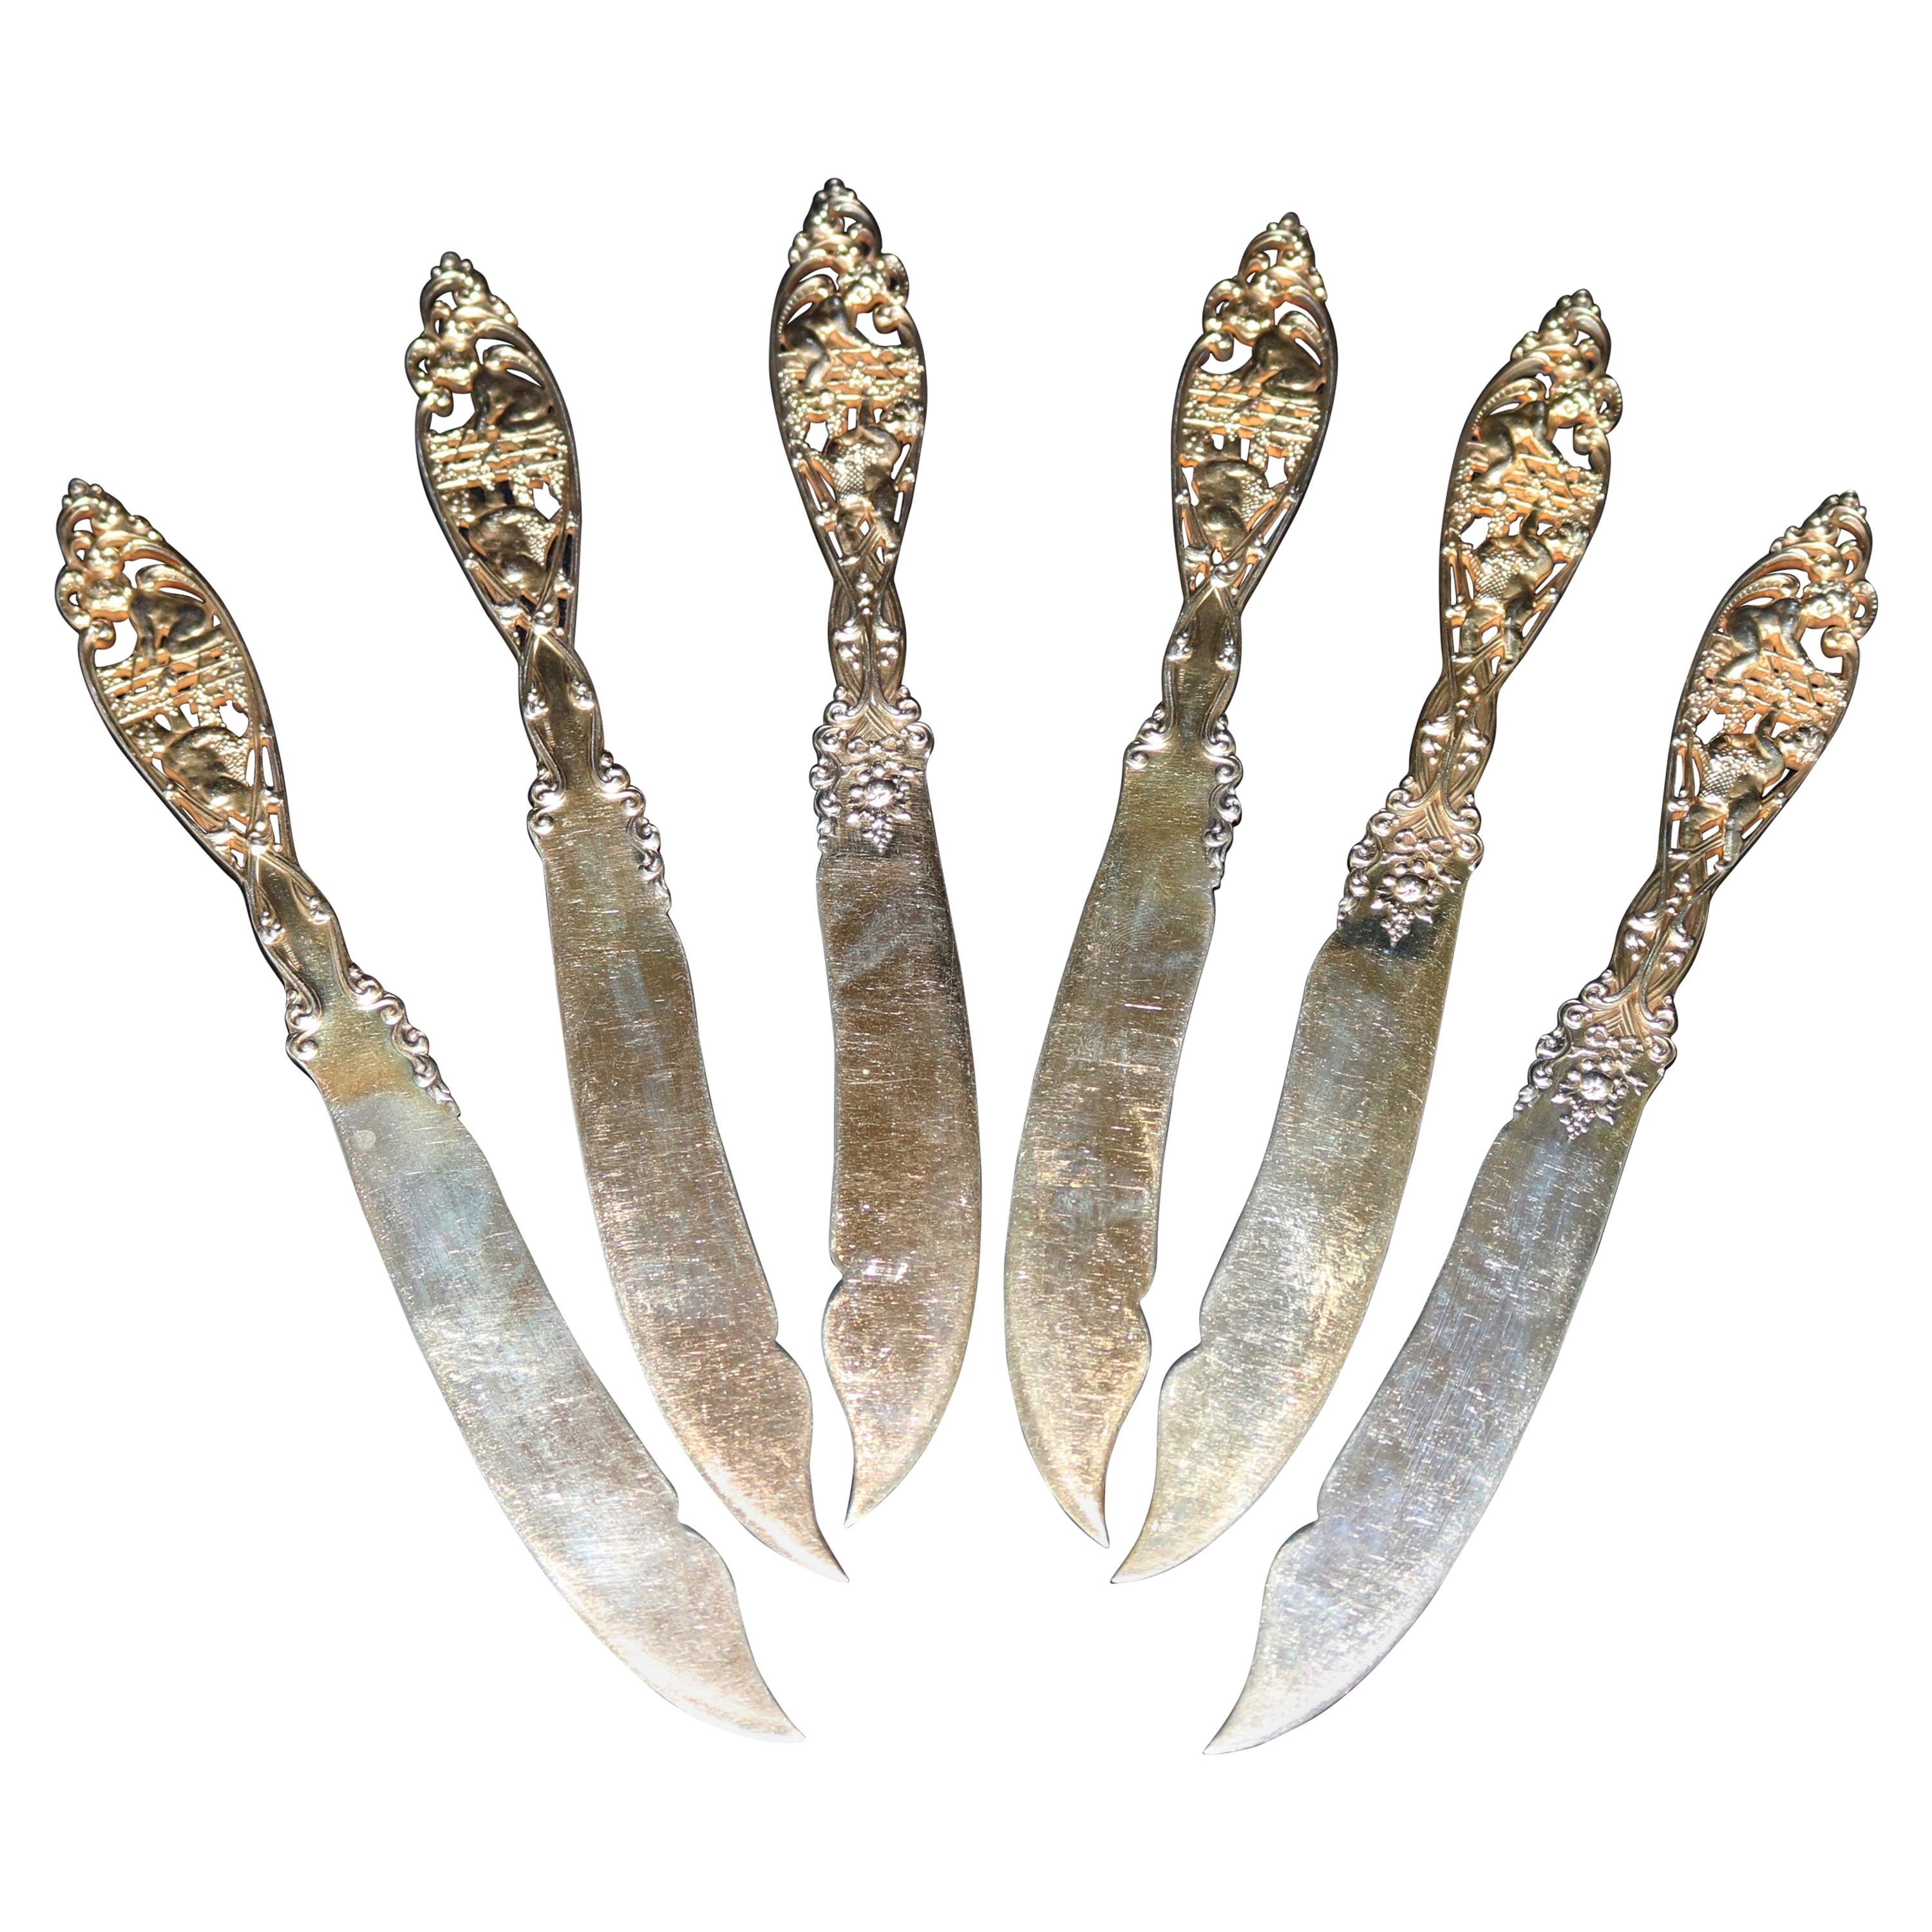 Six Gold Wash Sterling Silver "Labors of Cupid" Knives by Dominick and Haff